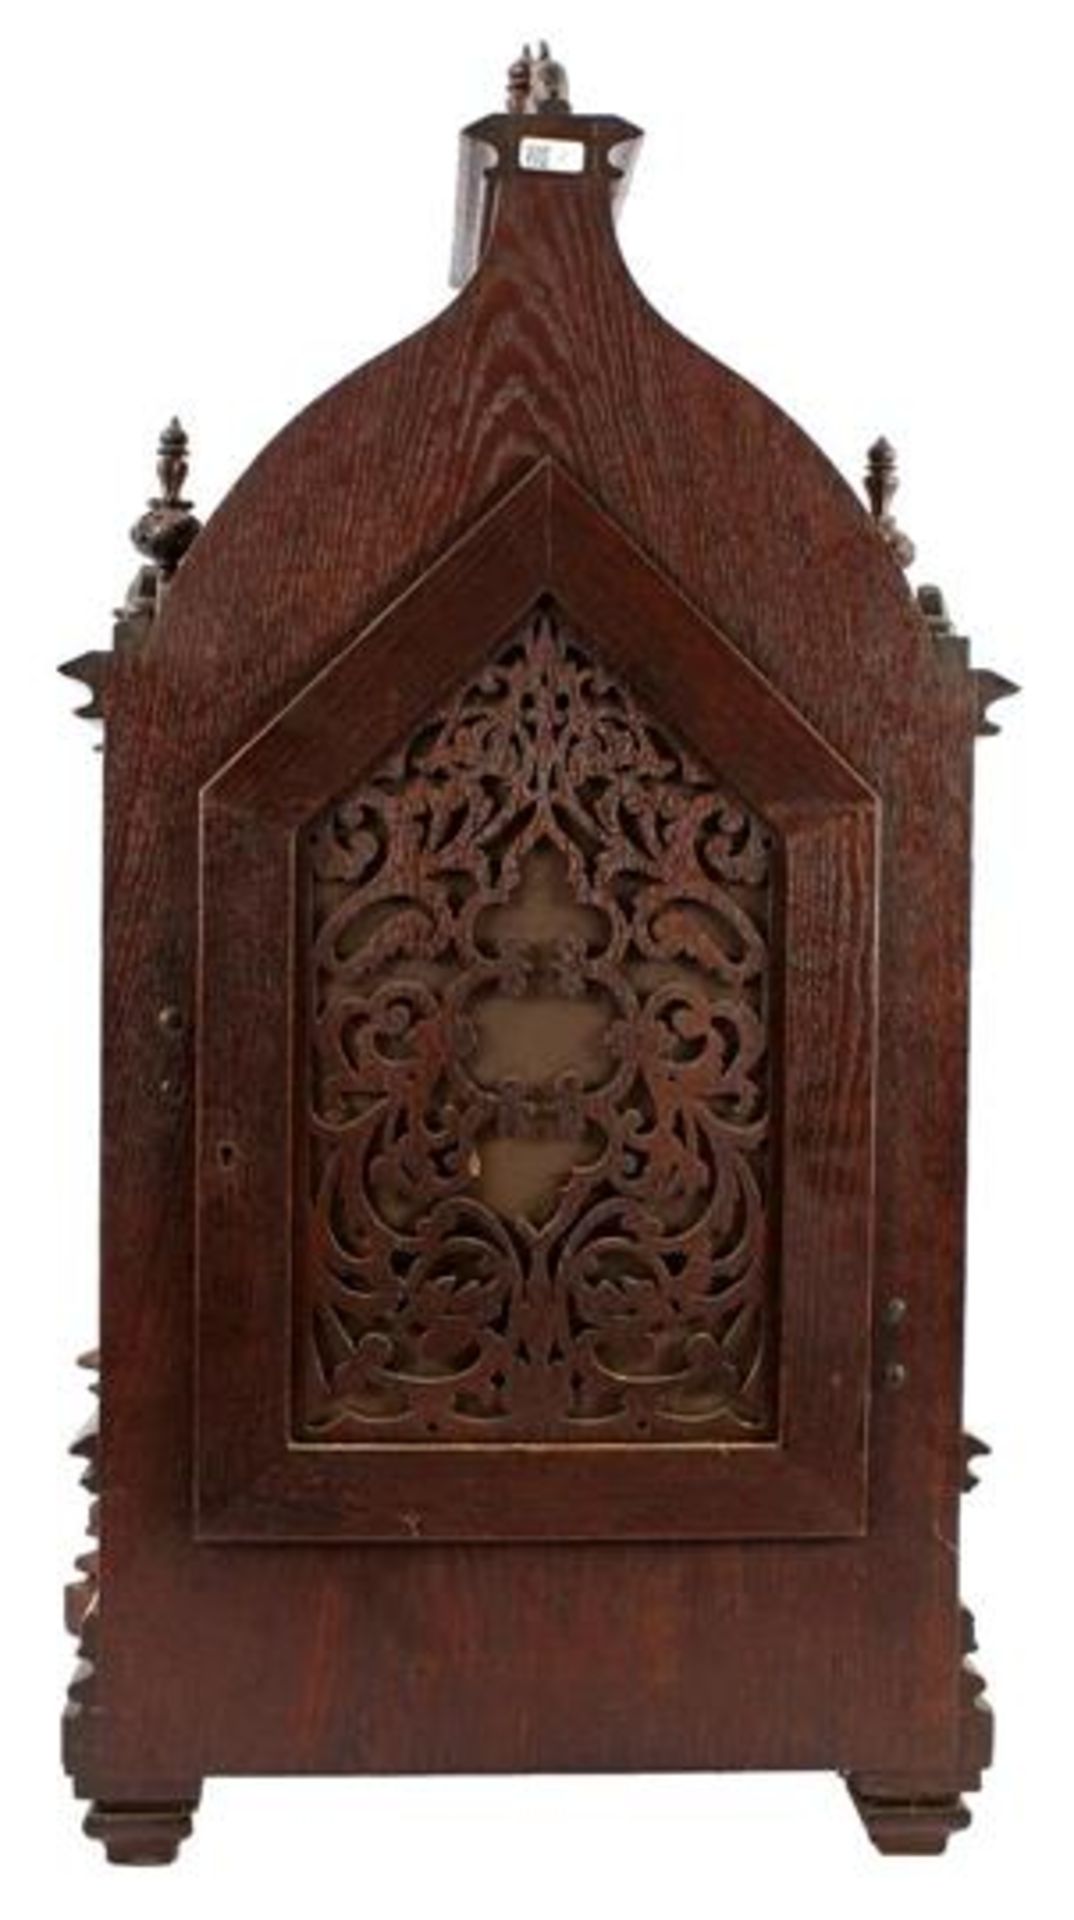 Lenzkirch table clock in gothic style with a pierced oak case with openwork & nbsp; parts 80 cm - Image 4 of 5